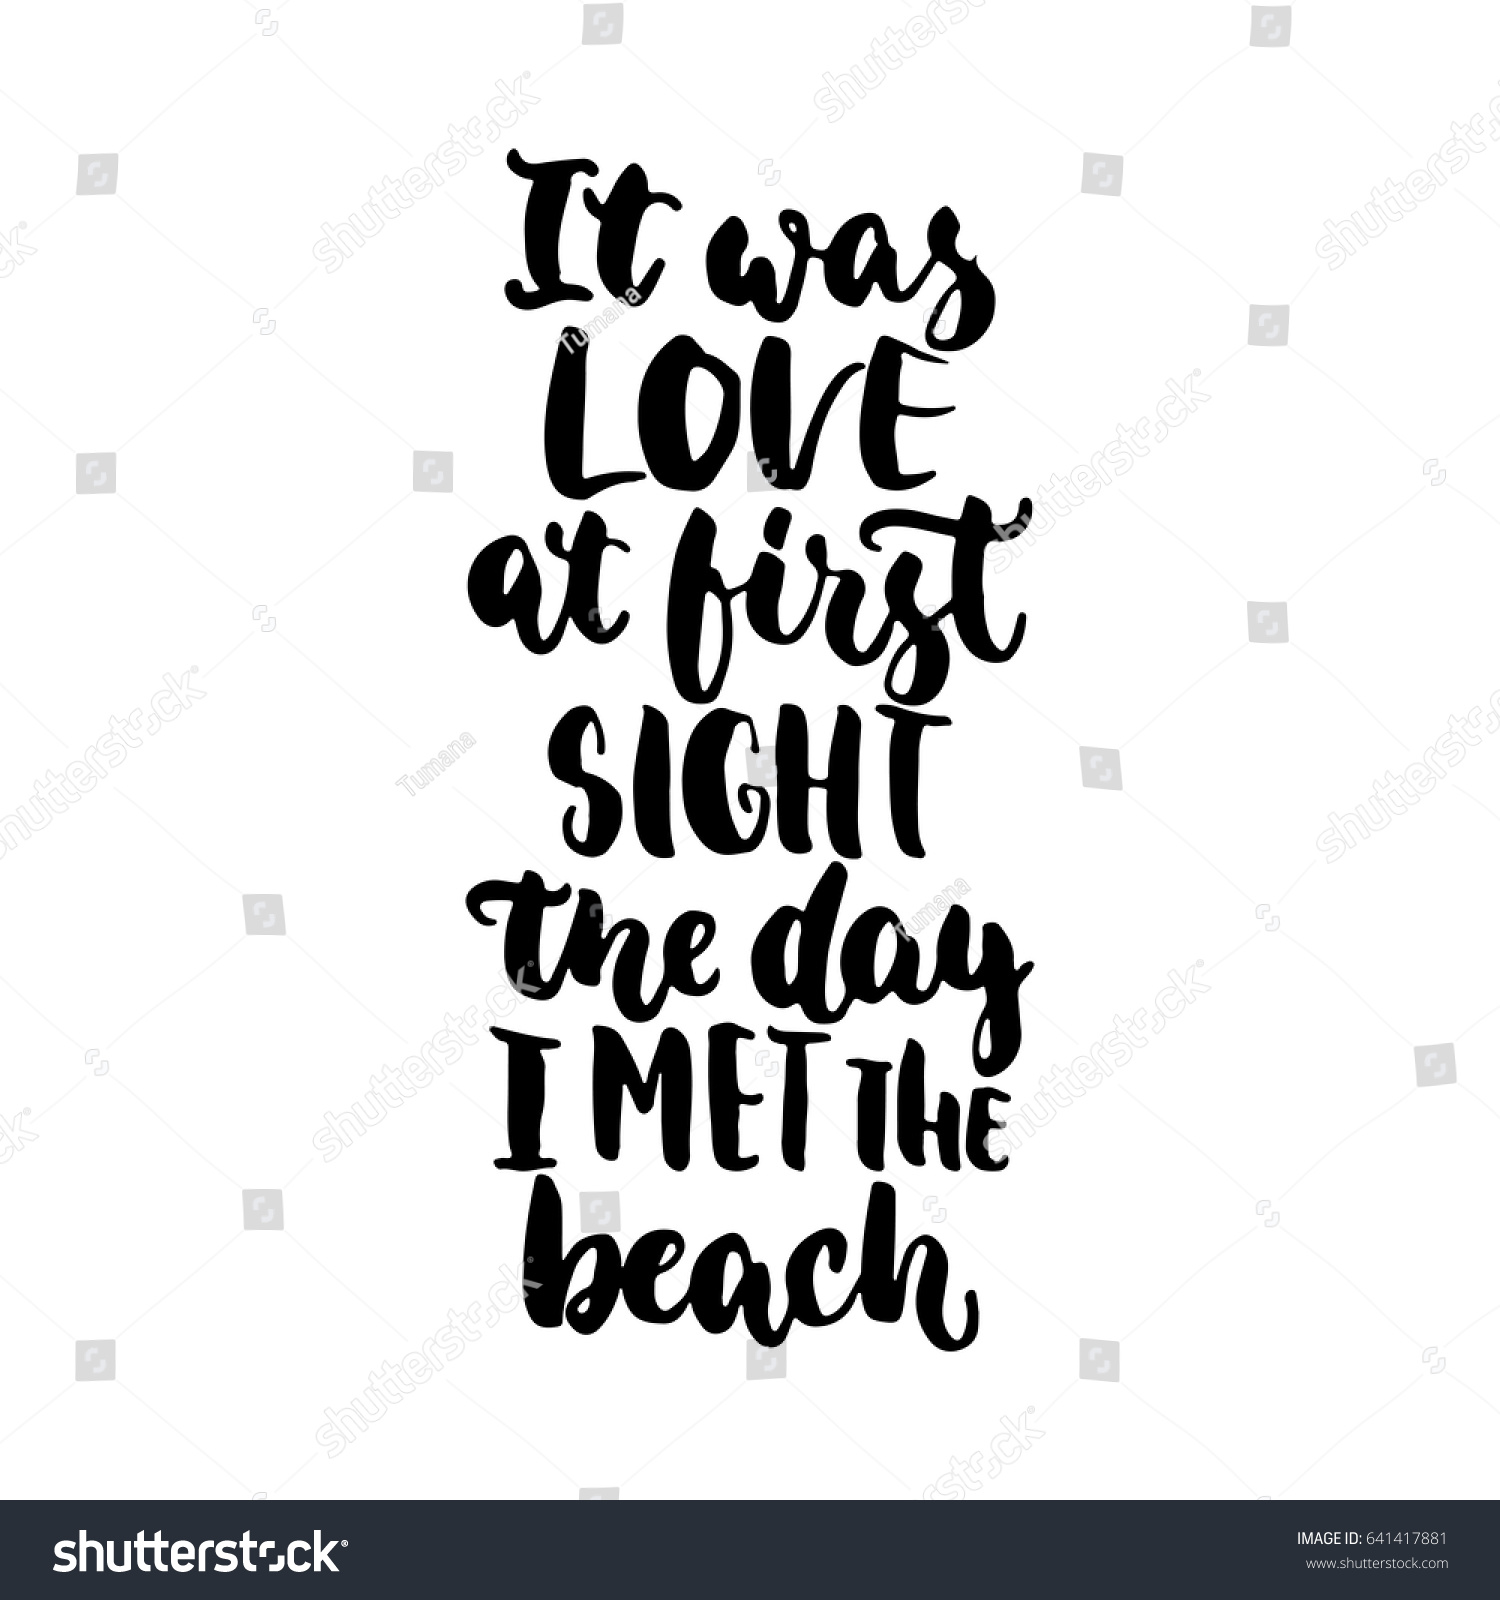 It was love at first sight the day i met the beach hand drawn lettering